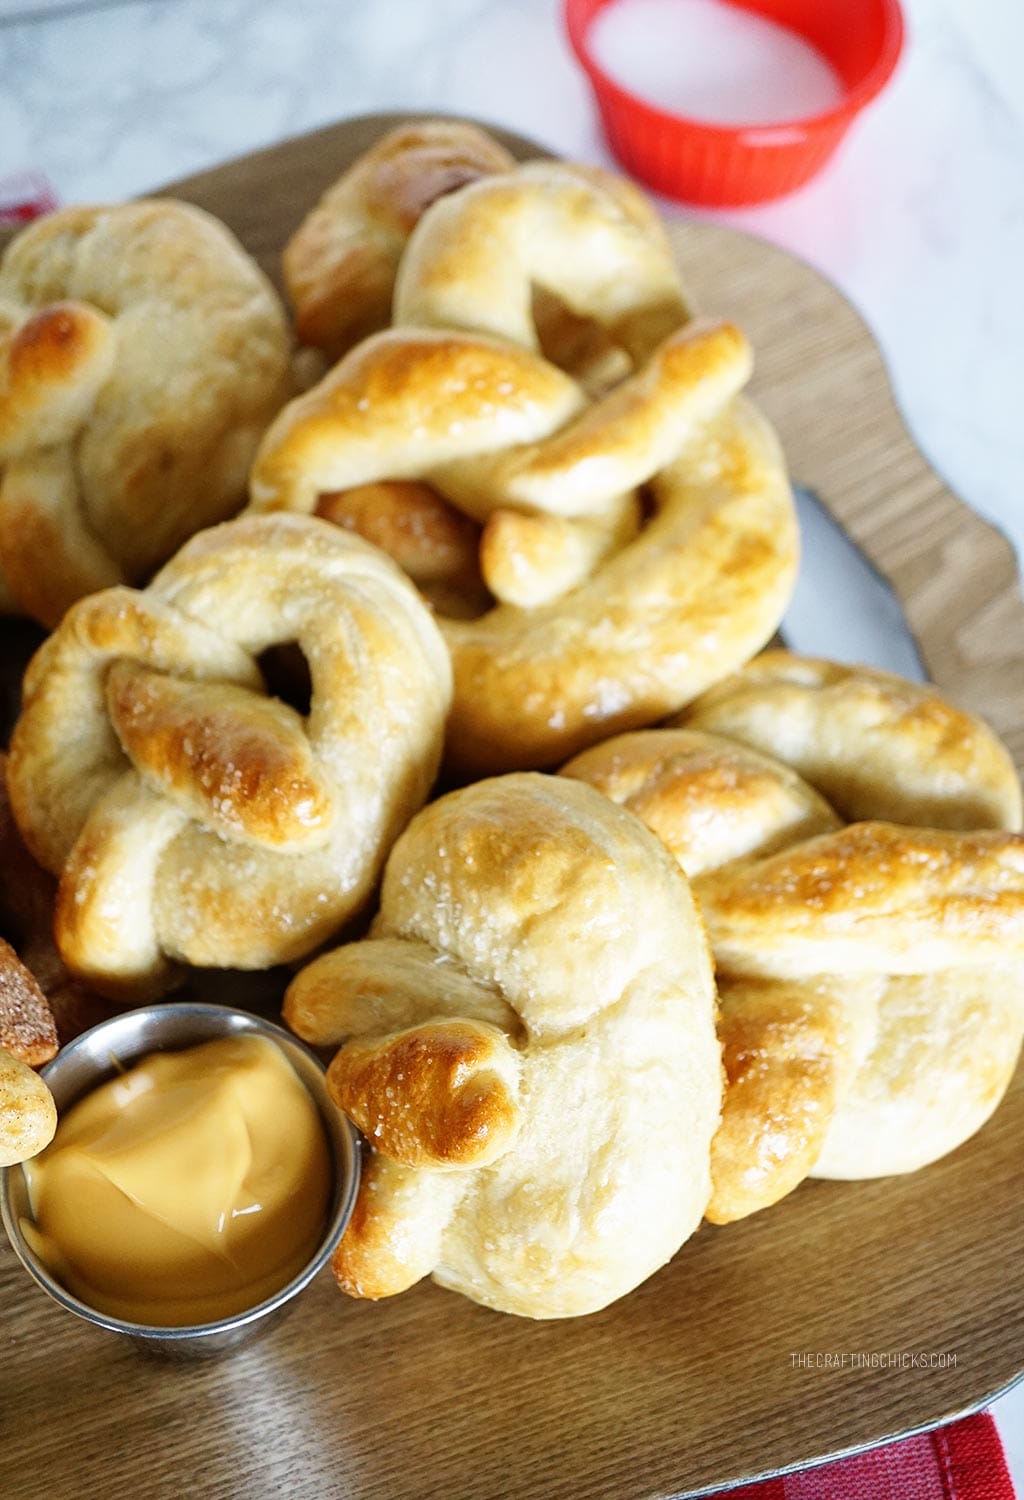 Soft Pretzel Recipe is delicious and easy to make!